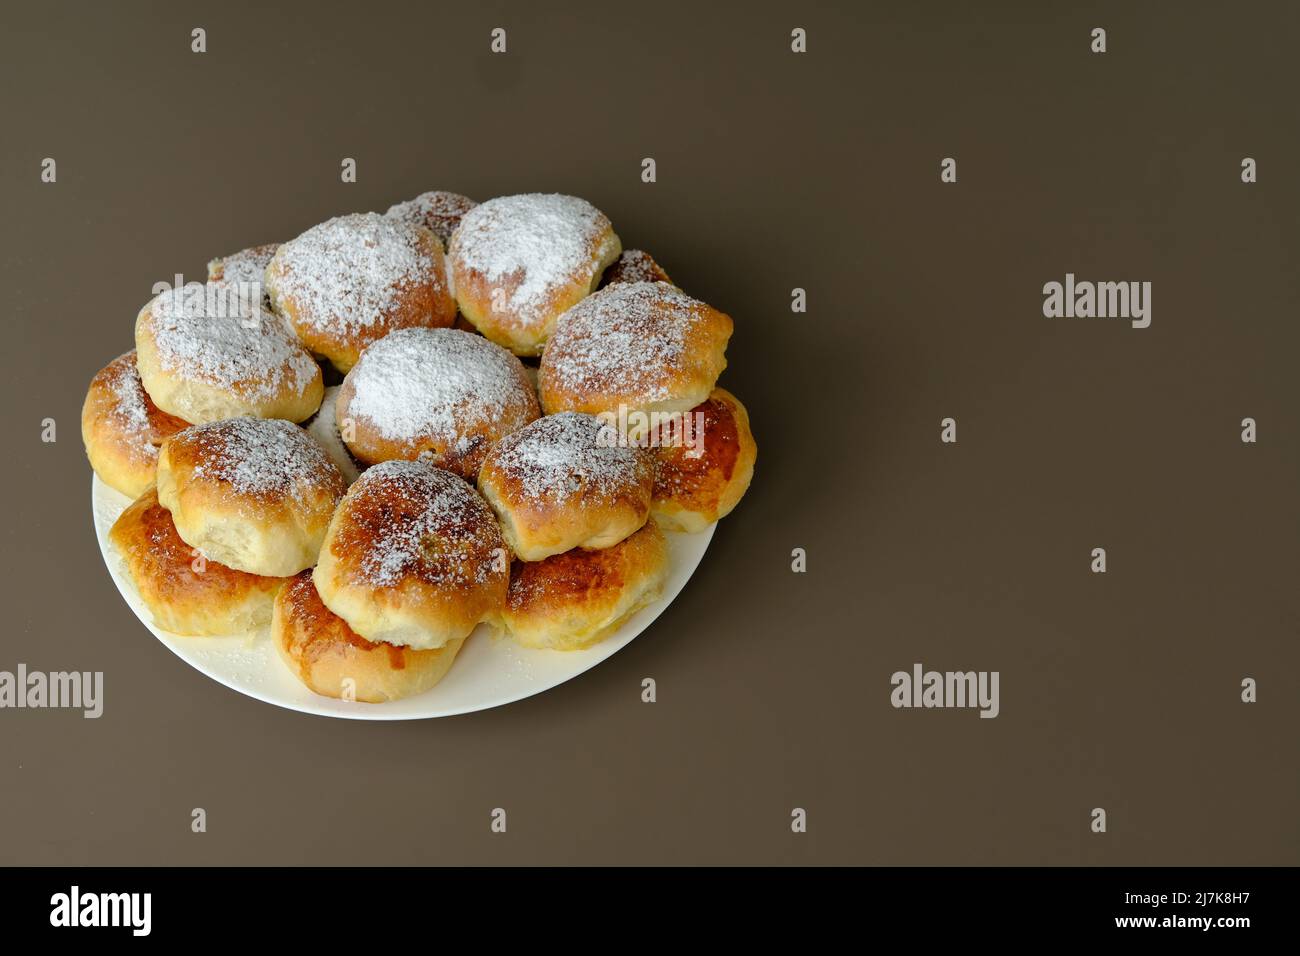 Homemade old fashioned apple dumplings or pies on a white plate and brown background. Baked according to Ukraine recipe. Stock Photo